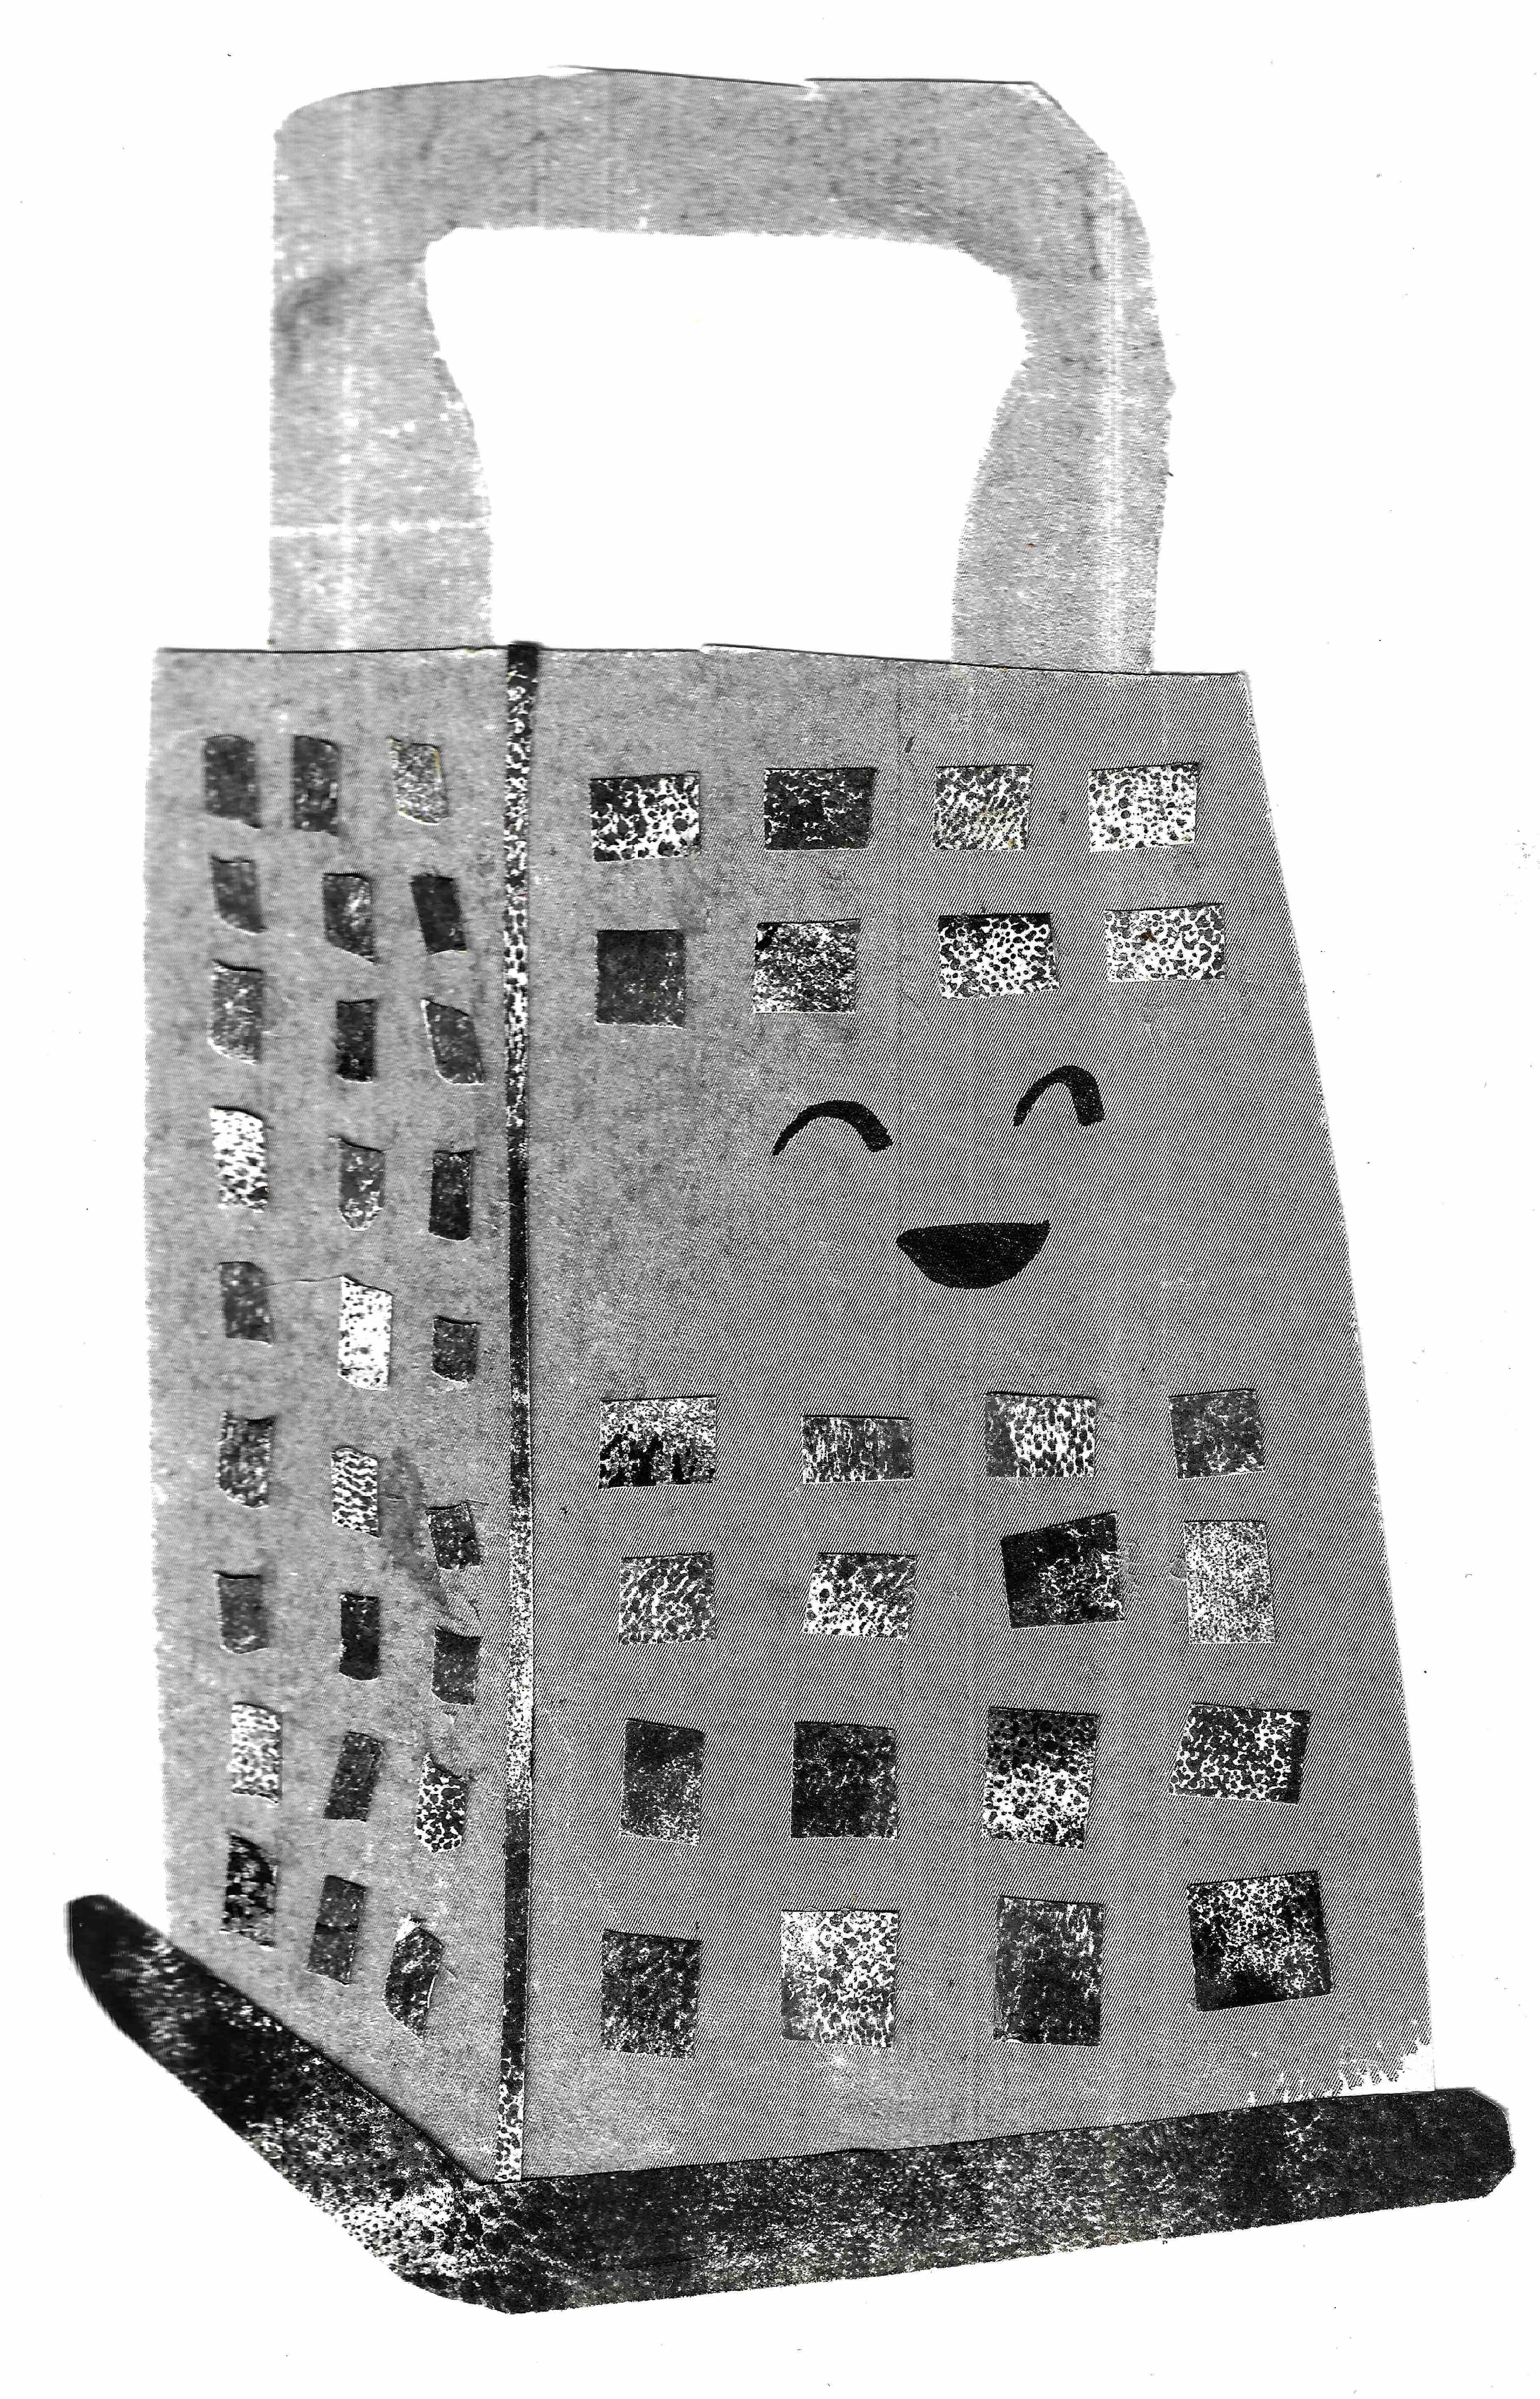 BA Illustration work by Natalie Martinez showing a collage of a cheese grater with a smiling face.